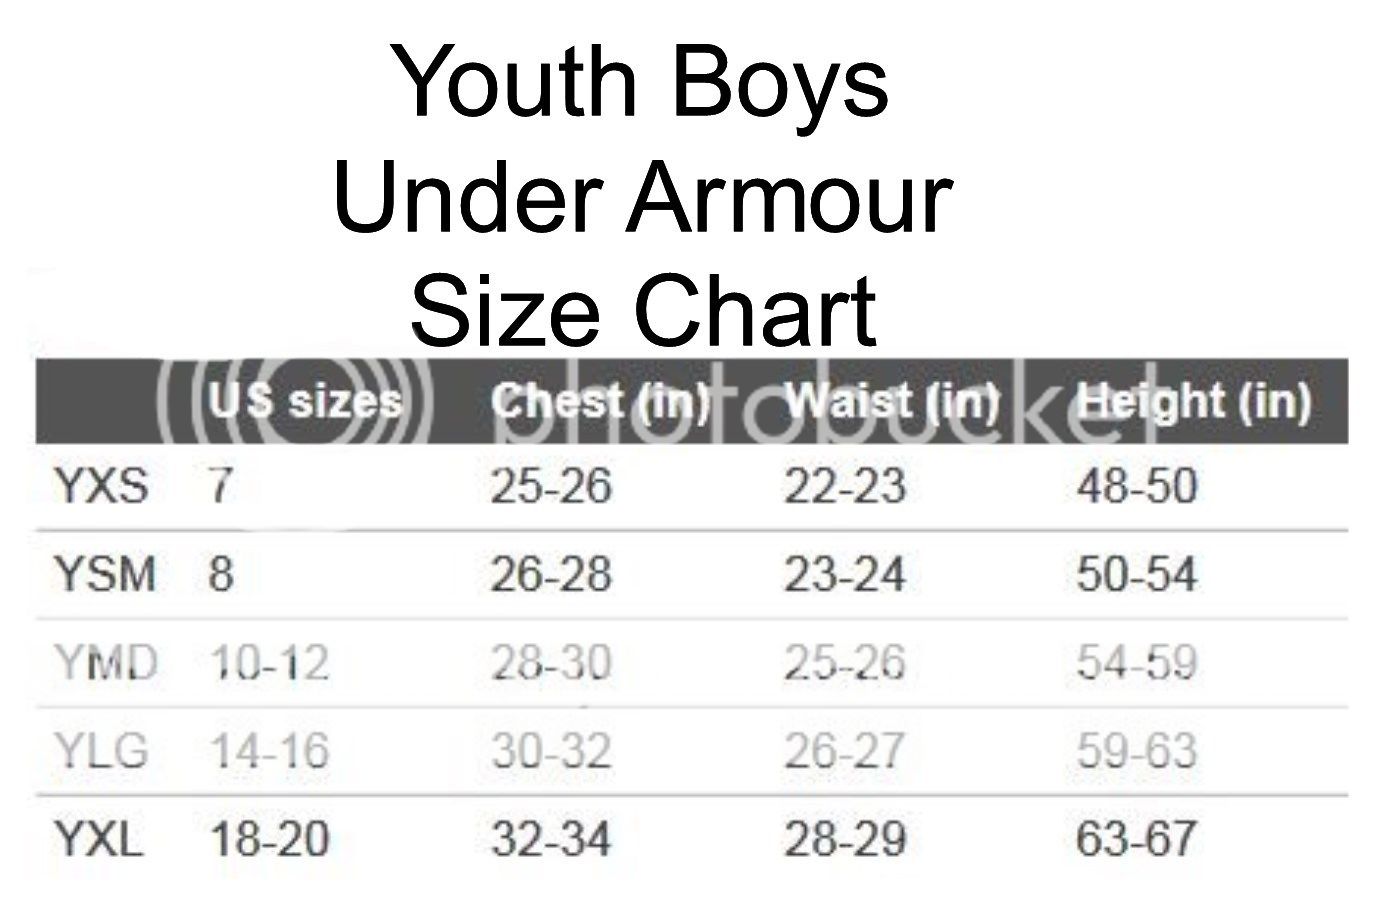 UNDER ARMOUR T SHIRT SPORTS SAYINGS ATHLETIC TOP YOUTH TEENS BOYS ...